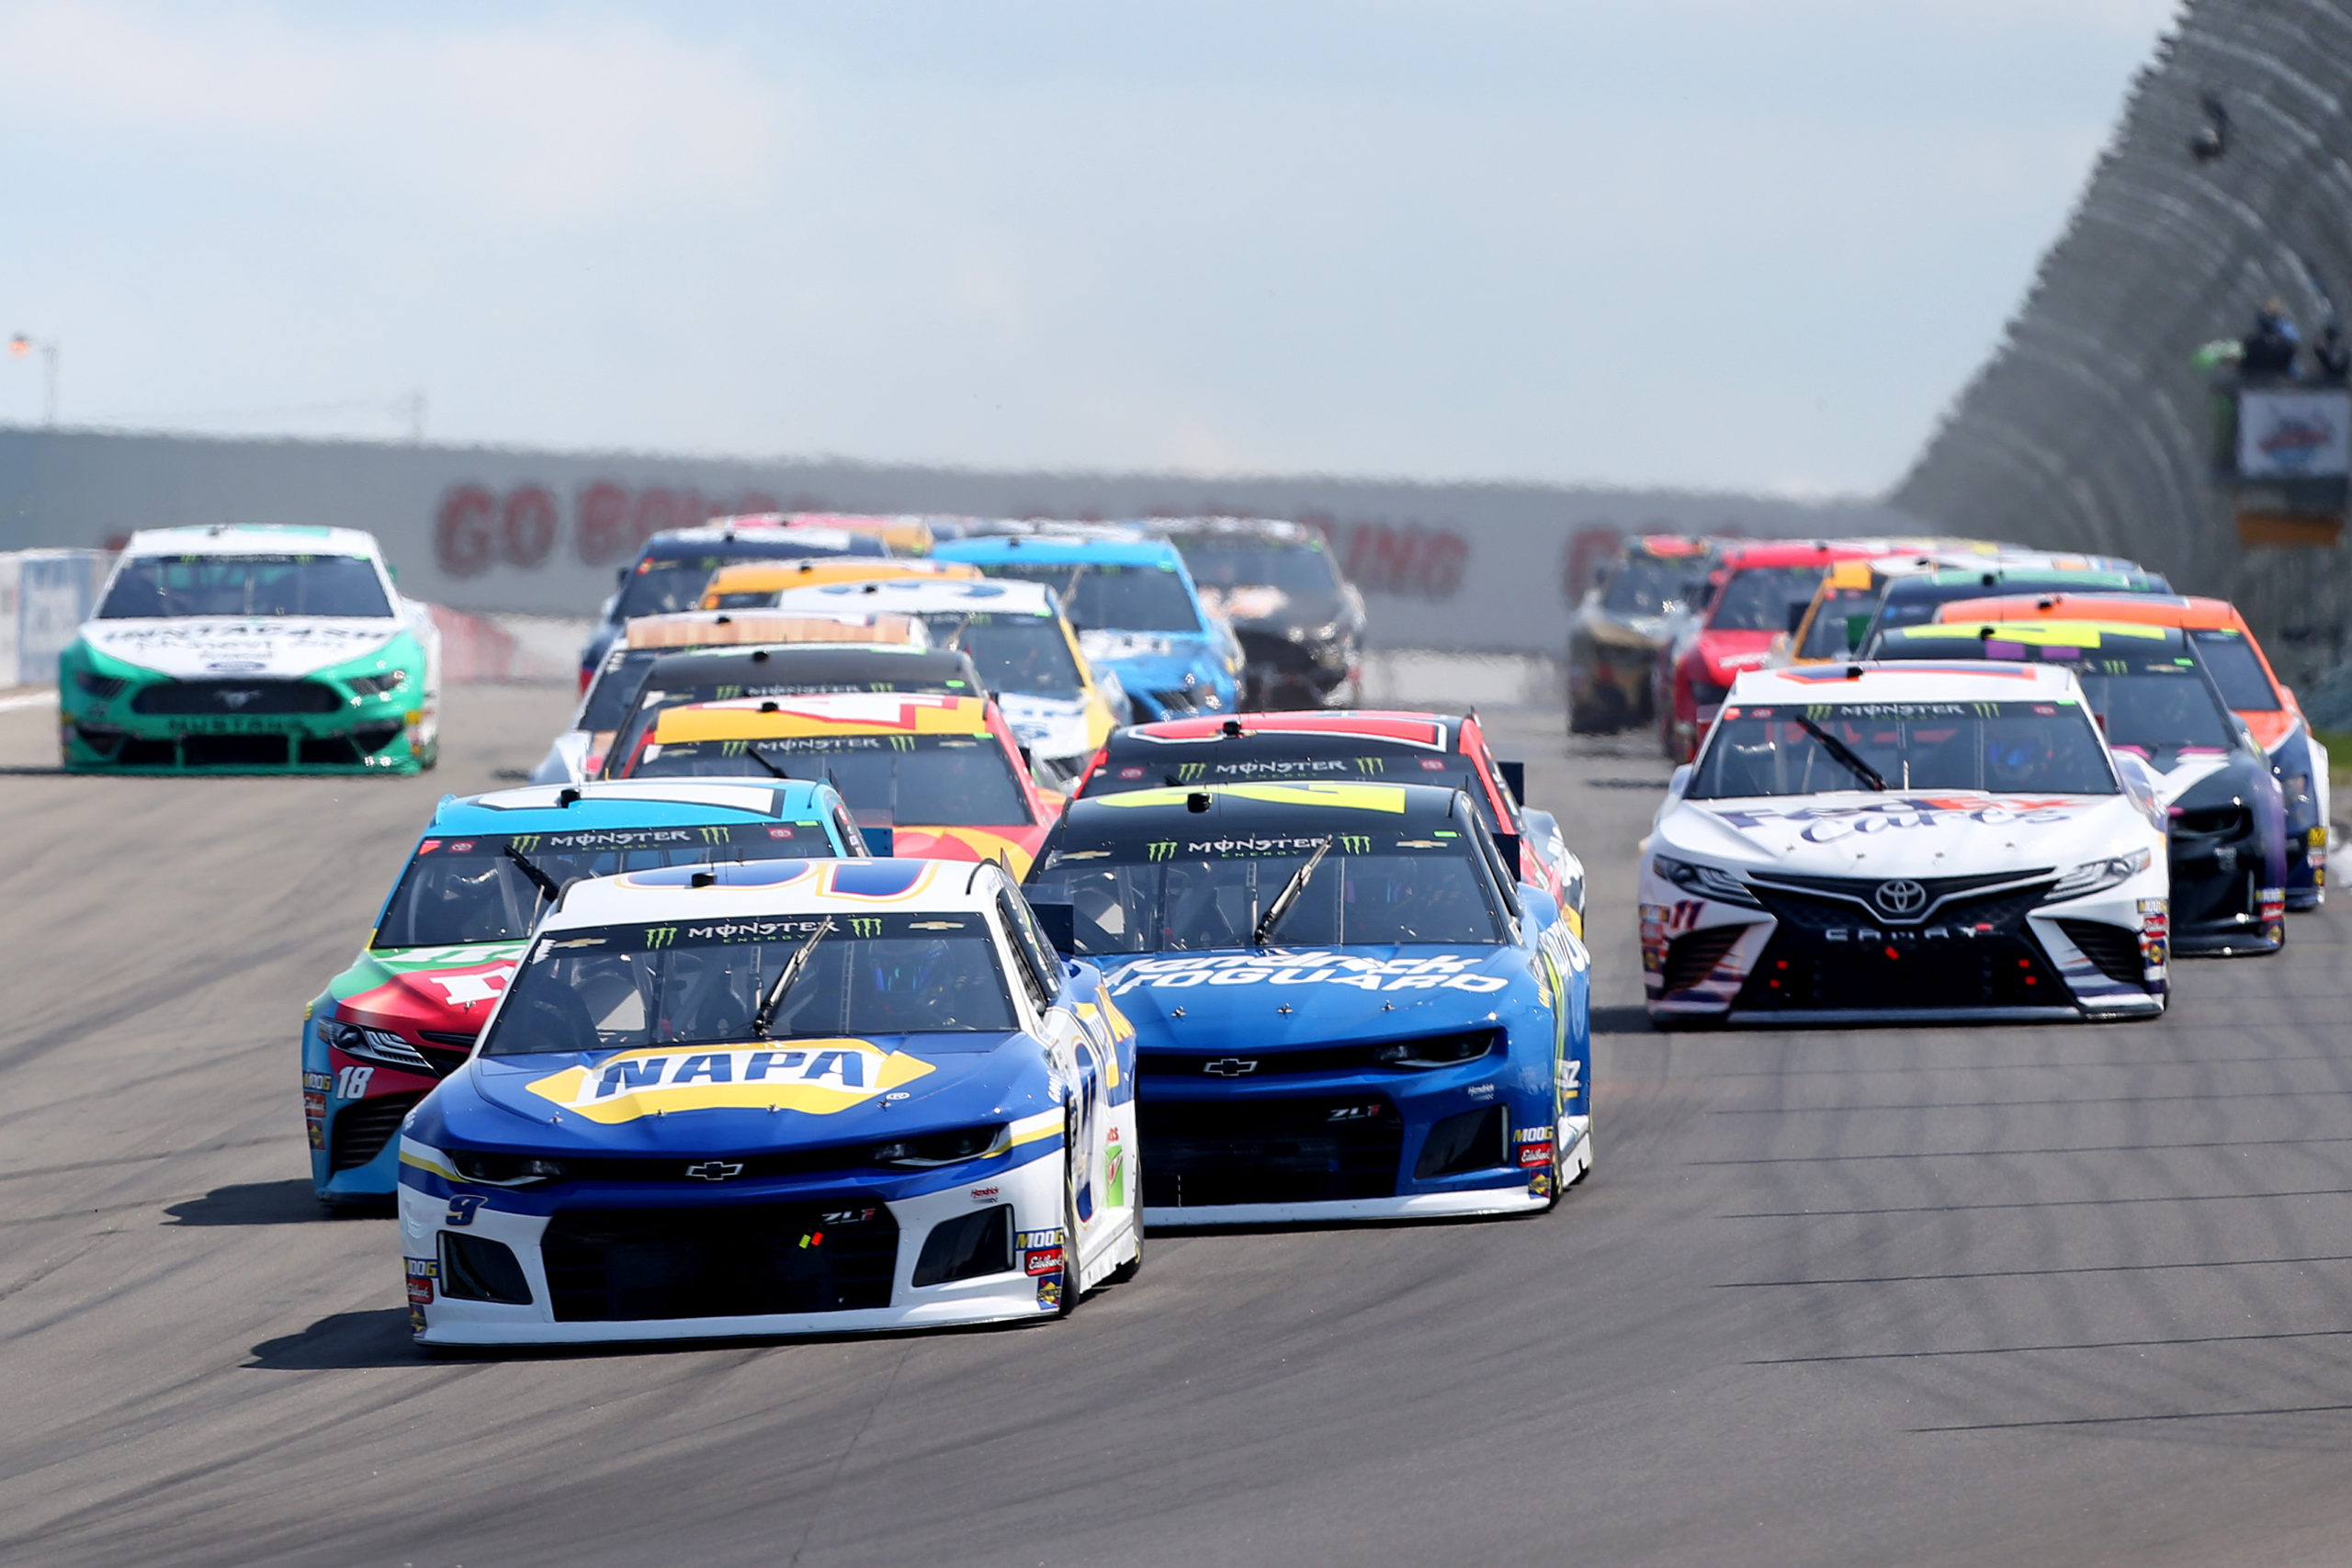 Who Will Come Back Strong in Watkins Glen Return?